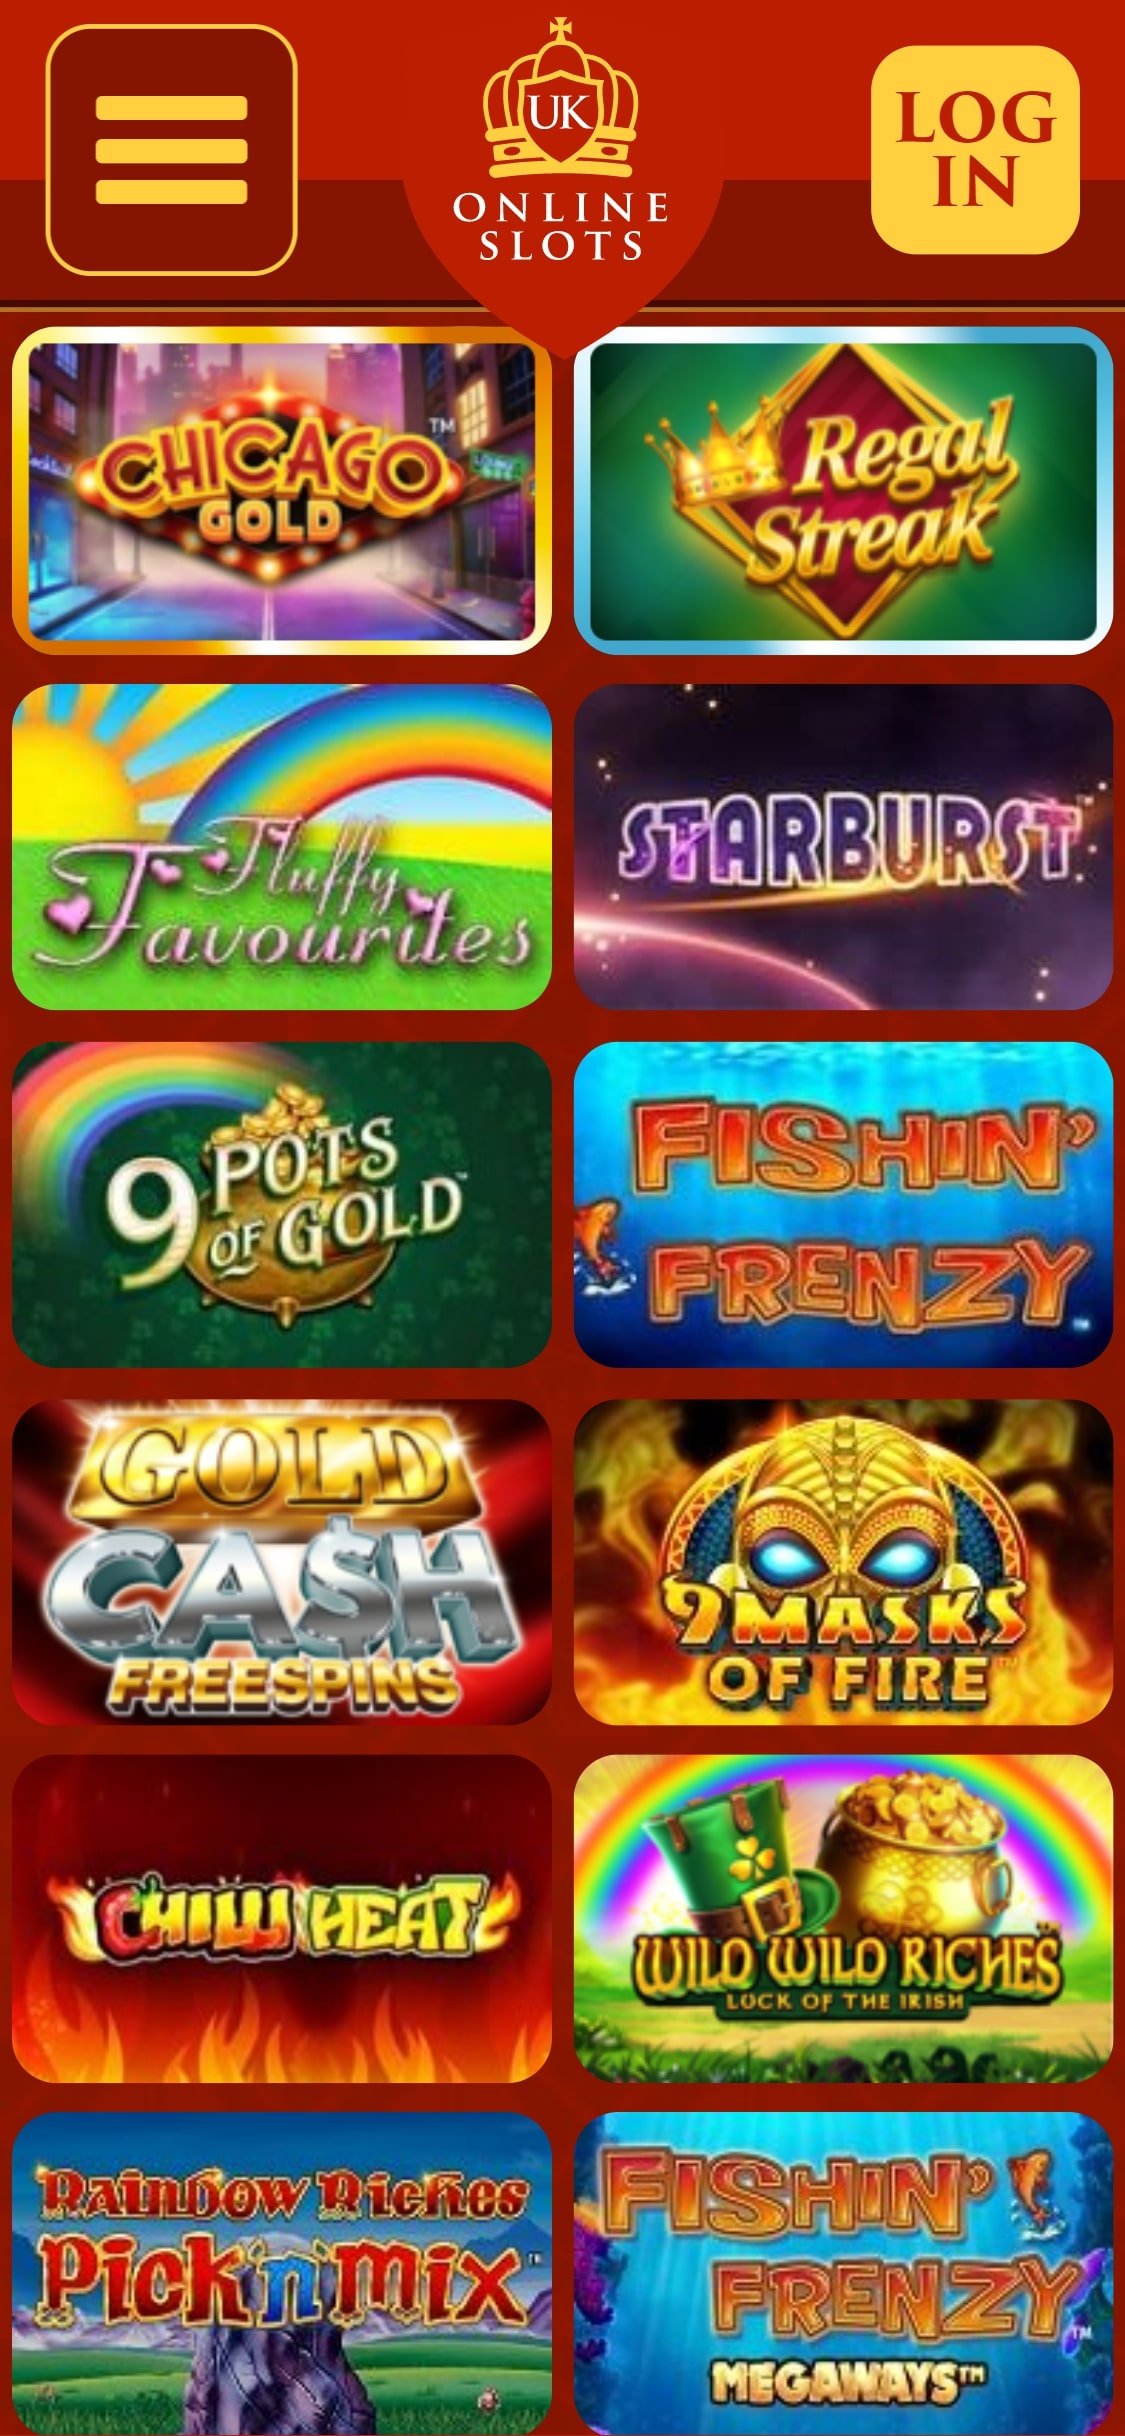 UK Online Slots Casino Mobile Games Review